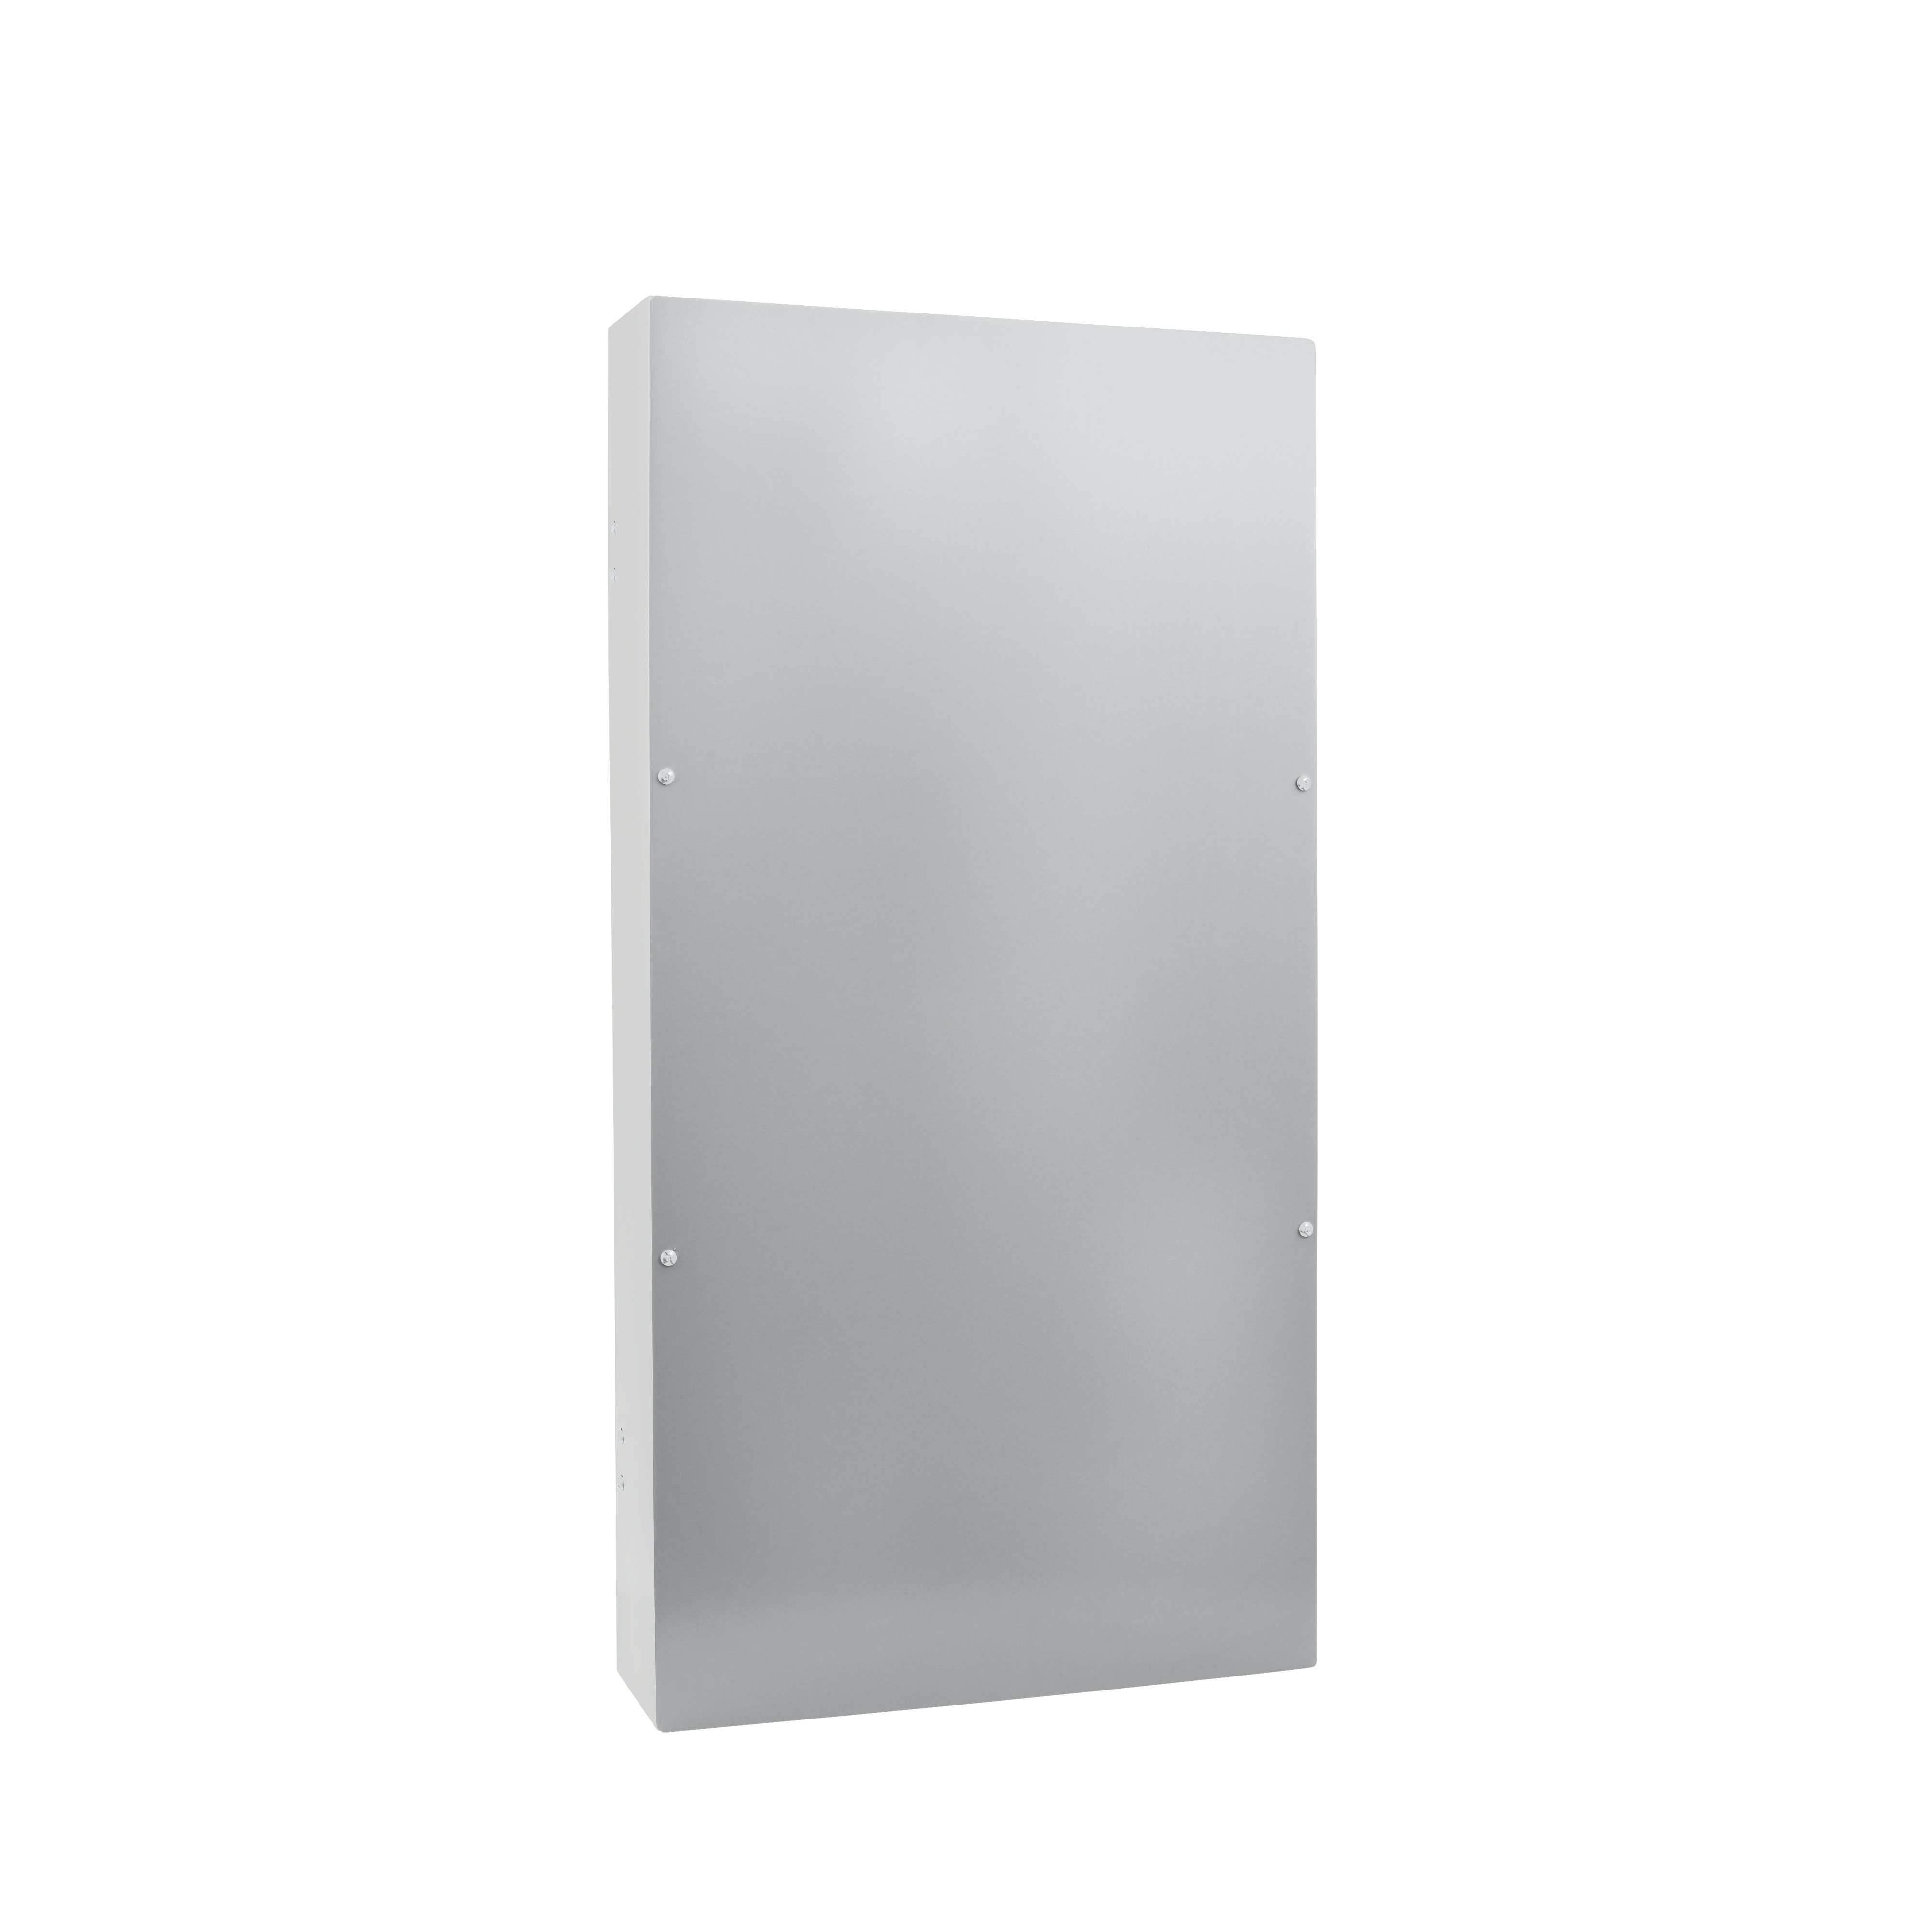 Enclosure Panel Skirt Assembly, NQNF, Type 1, 20x27x5.75in